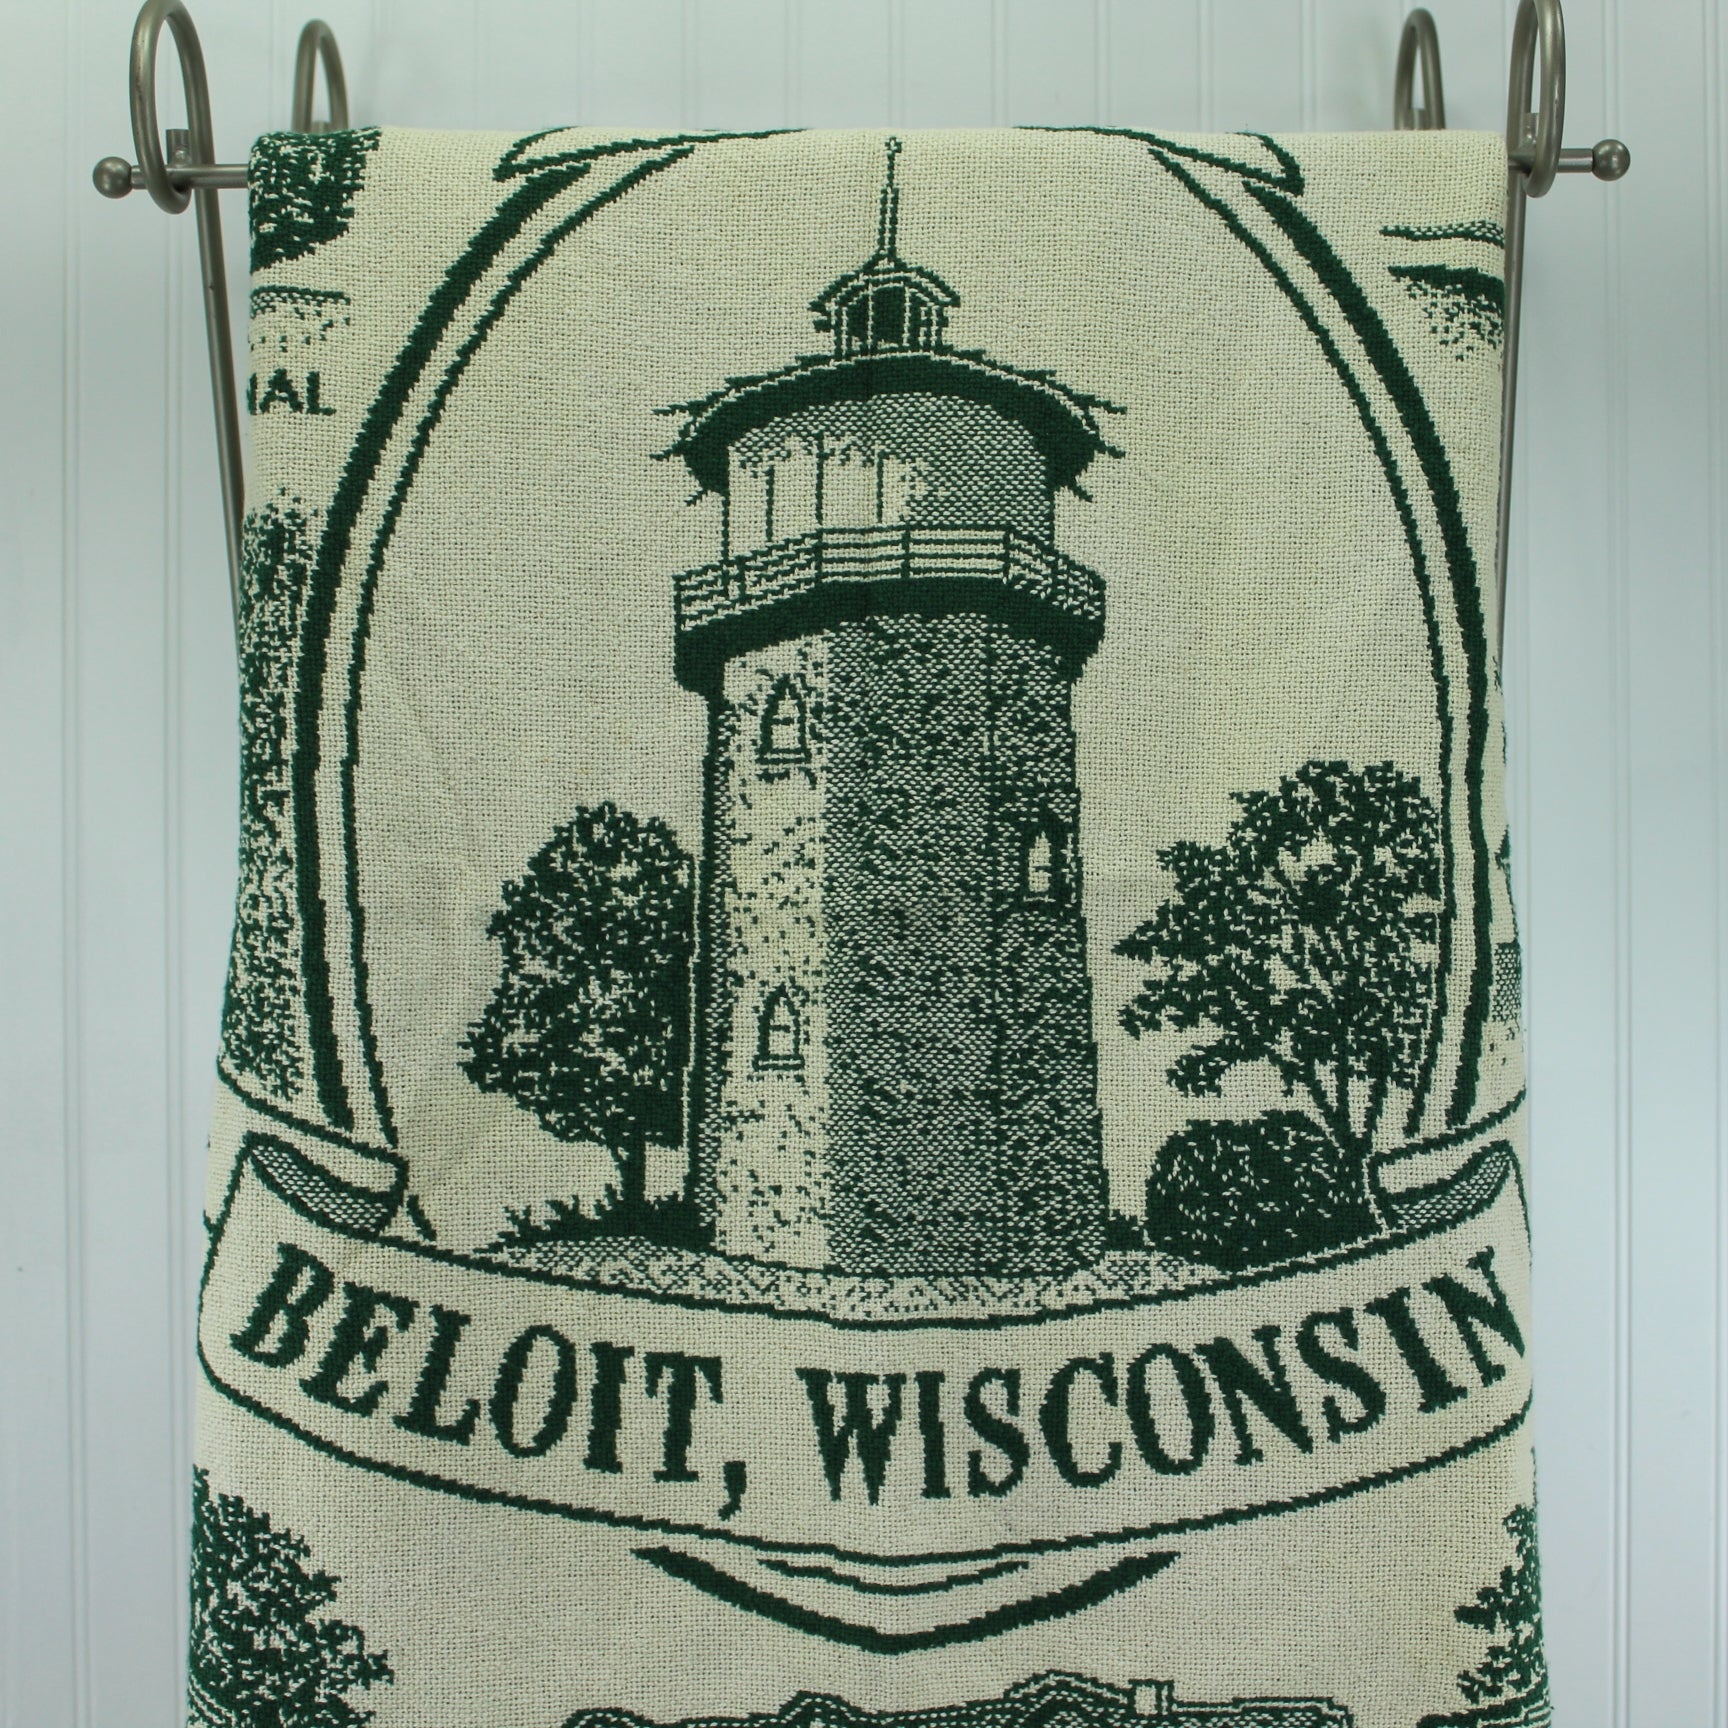 Beloit Wisconsin Woven Cotton Throw Blanket New Condition Historical Society Design Riddle Cockrell Beckman Mill